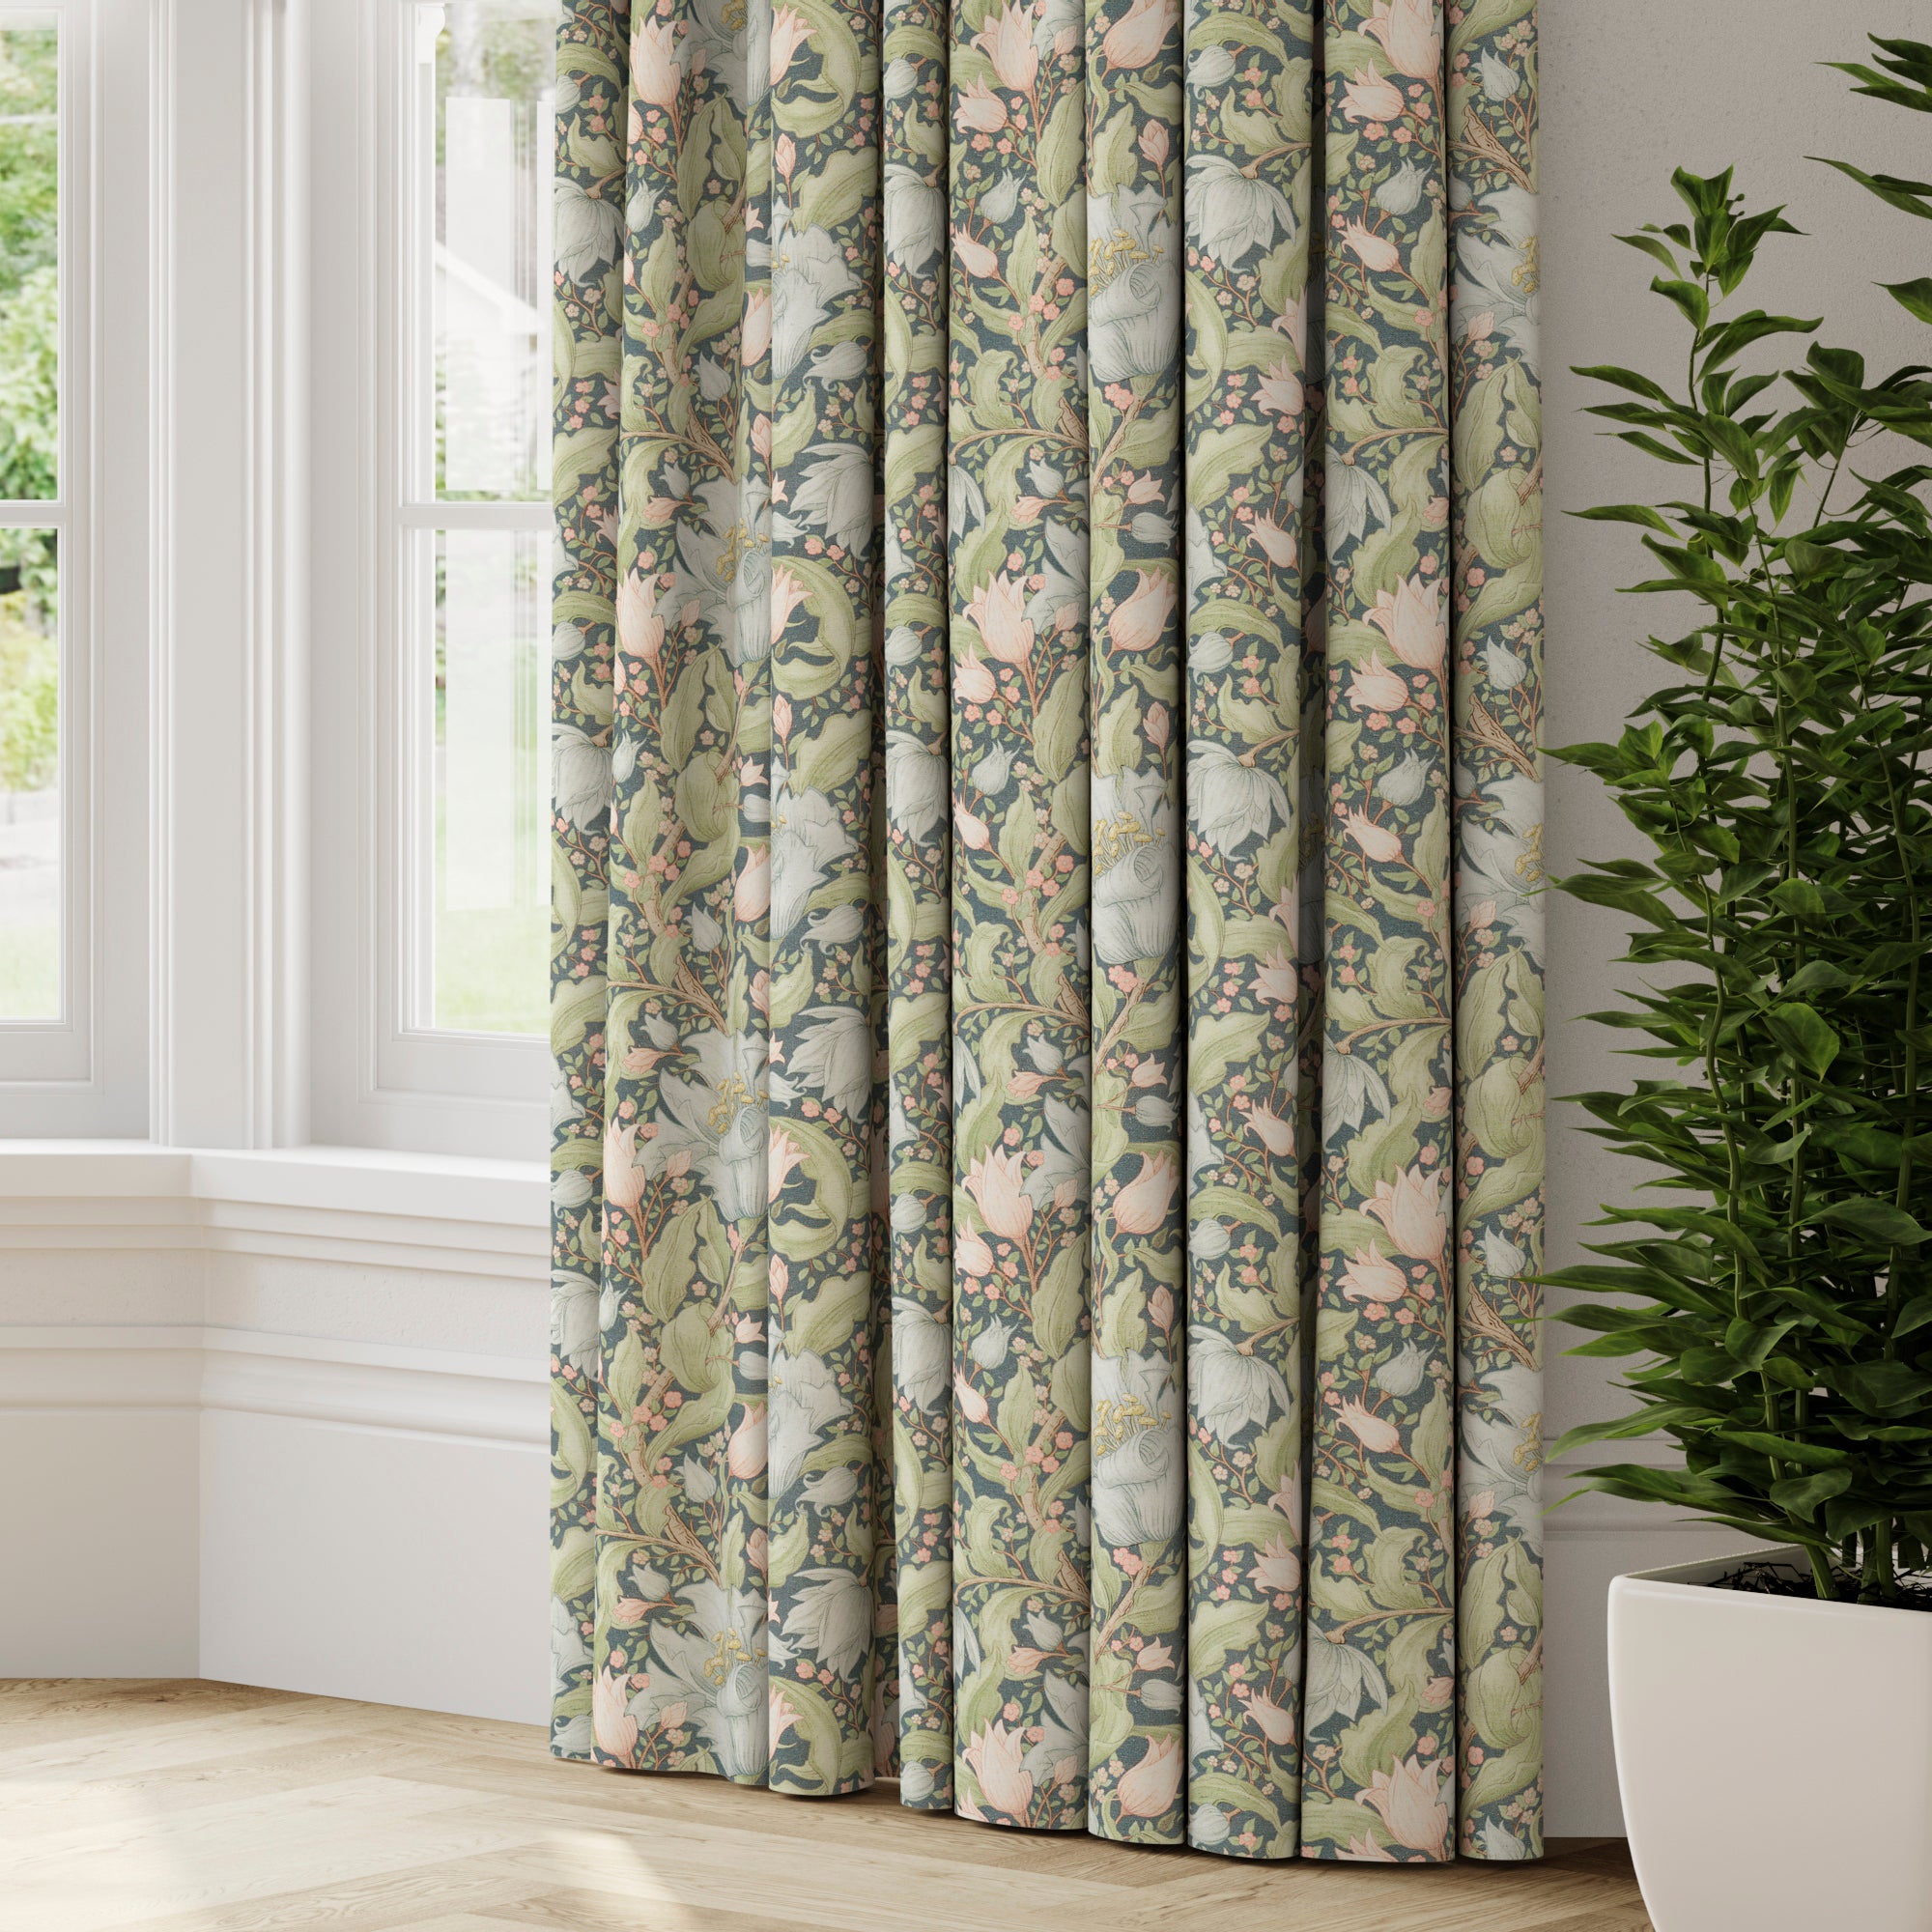 Helmshore Made to Measure Curtains